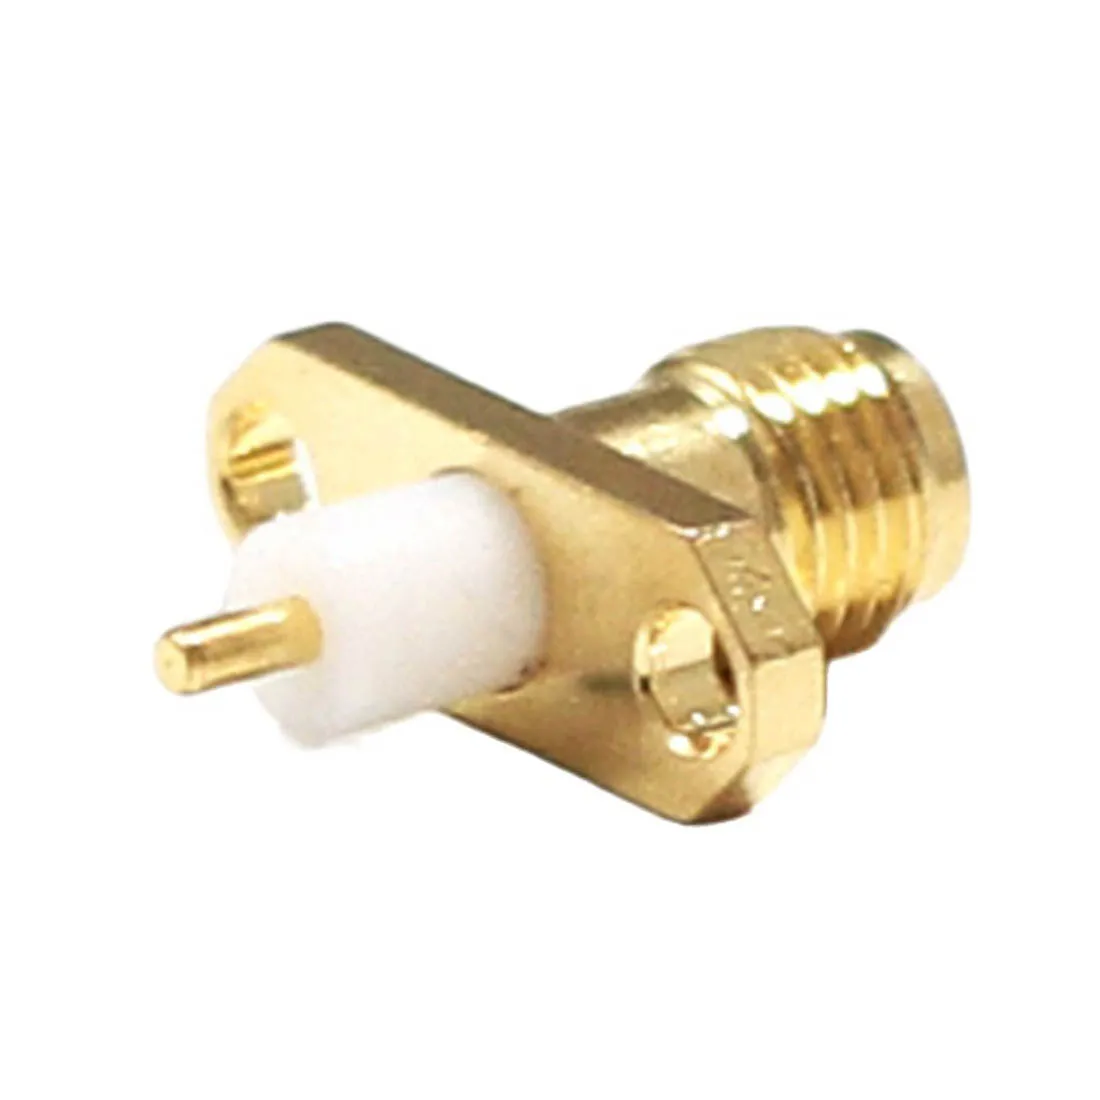 1pc NEW  SMA Female Jack RF Coax Modem Convertor Connector Panel Mount Solder Post Straight Insulator Long 4mm Goldplated 1pcs 12v for dc power supply jack socket female panel mount connector 5 5mm 2 1mm plug adapter 2 terminal types 5 5 2 1